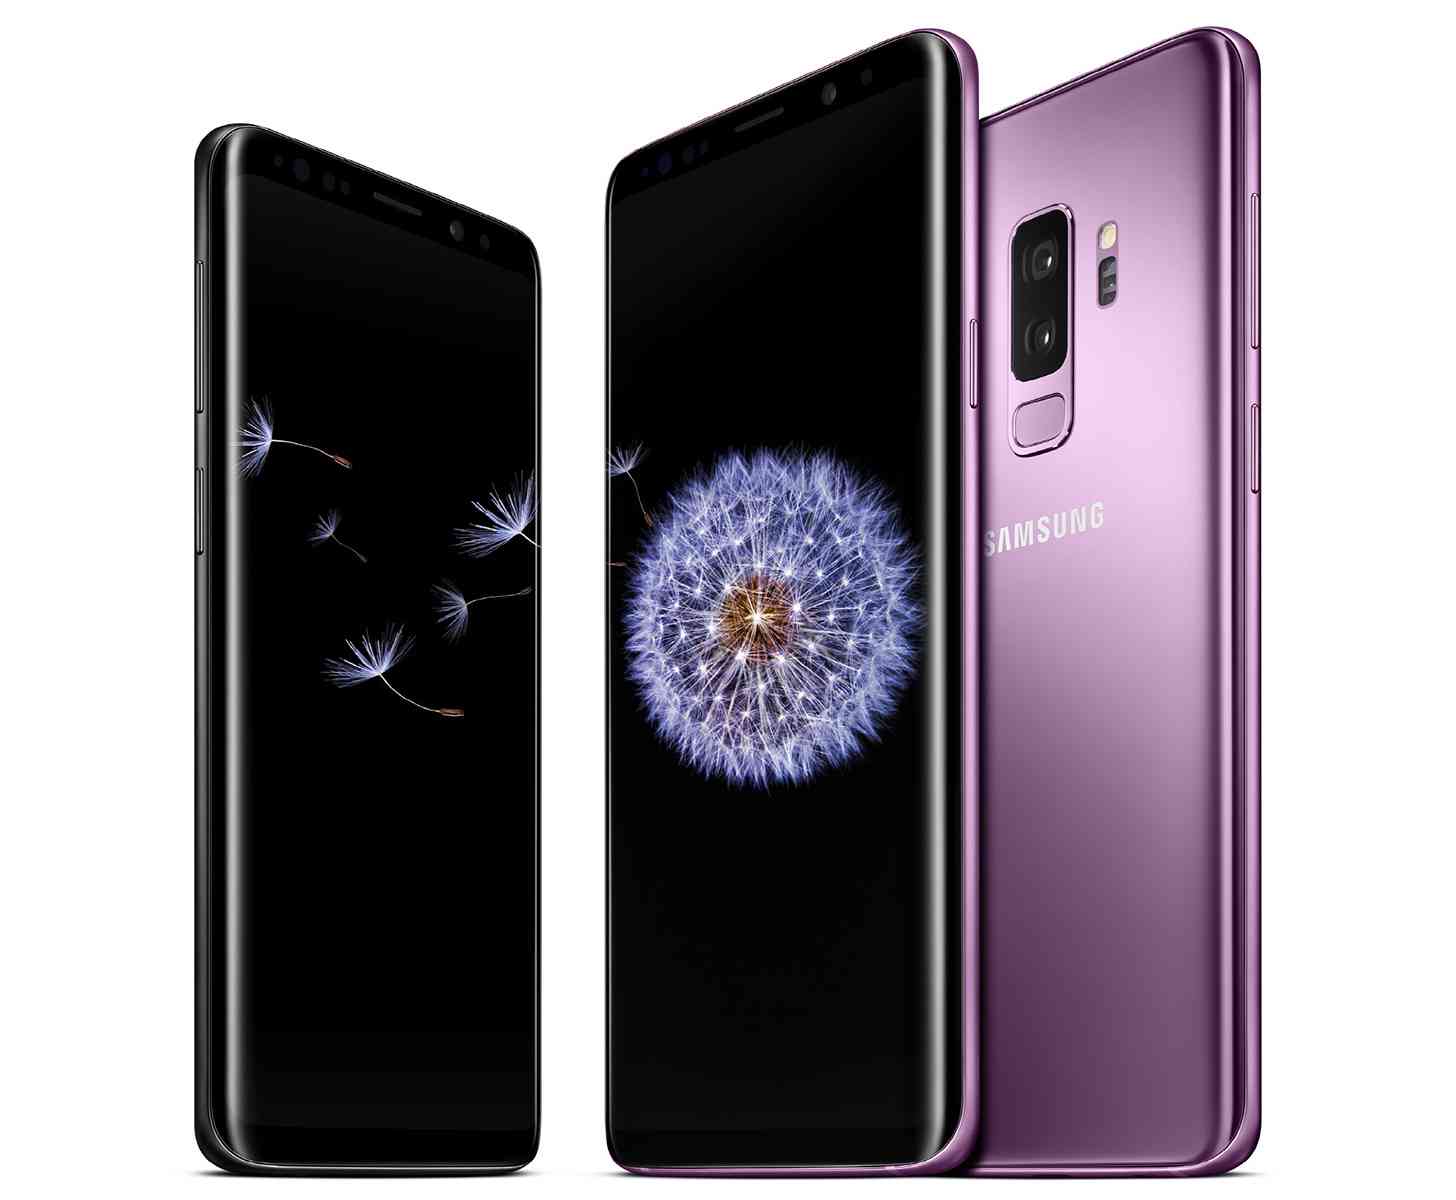 Samsung Galaxy S9+ official